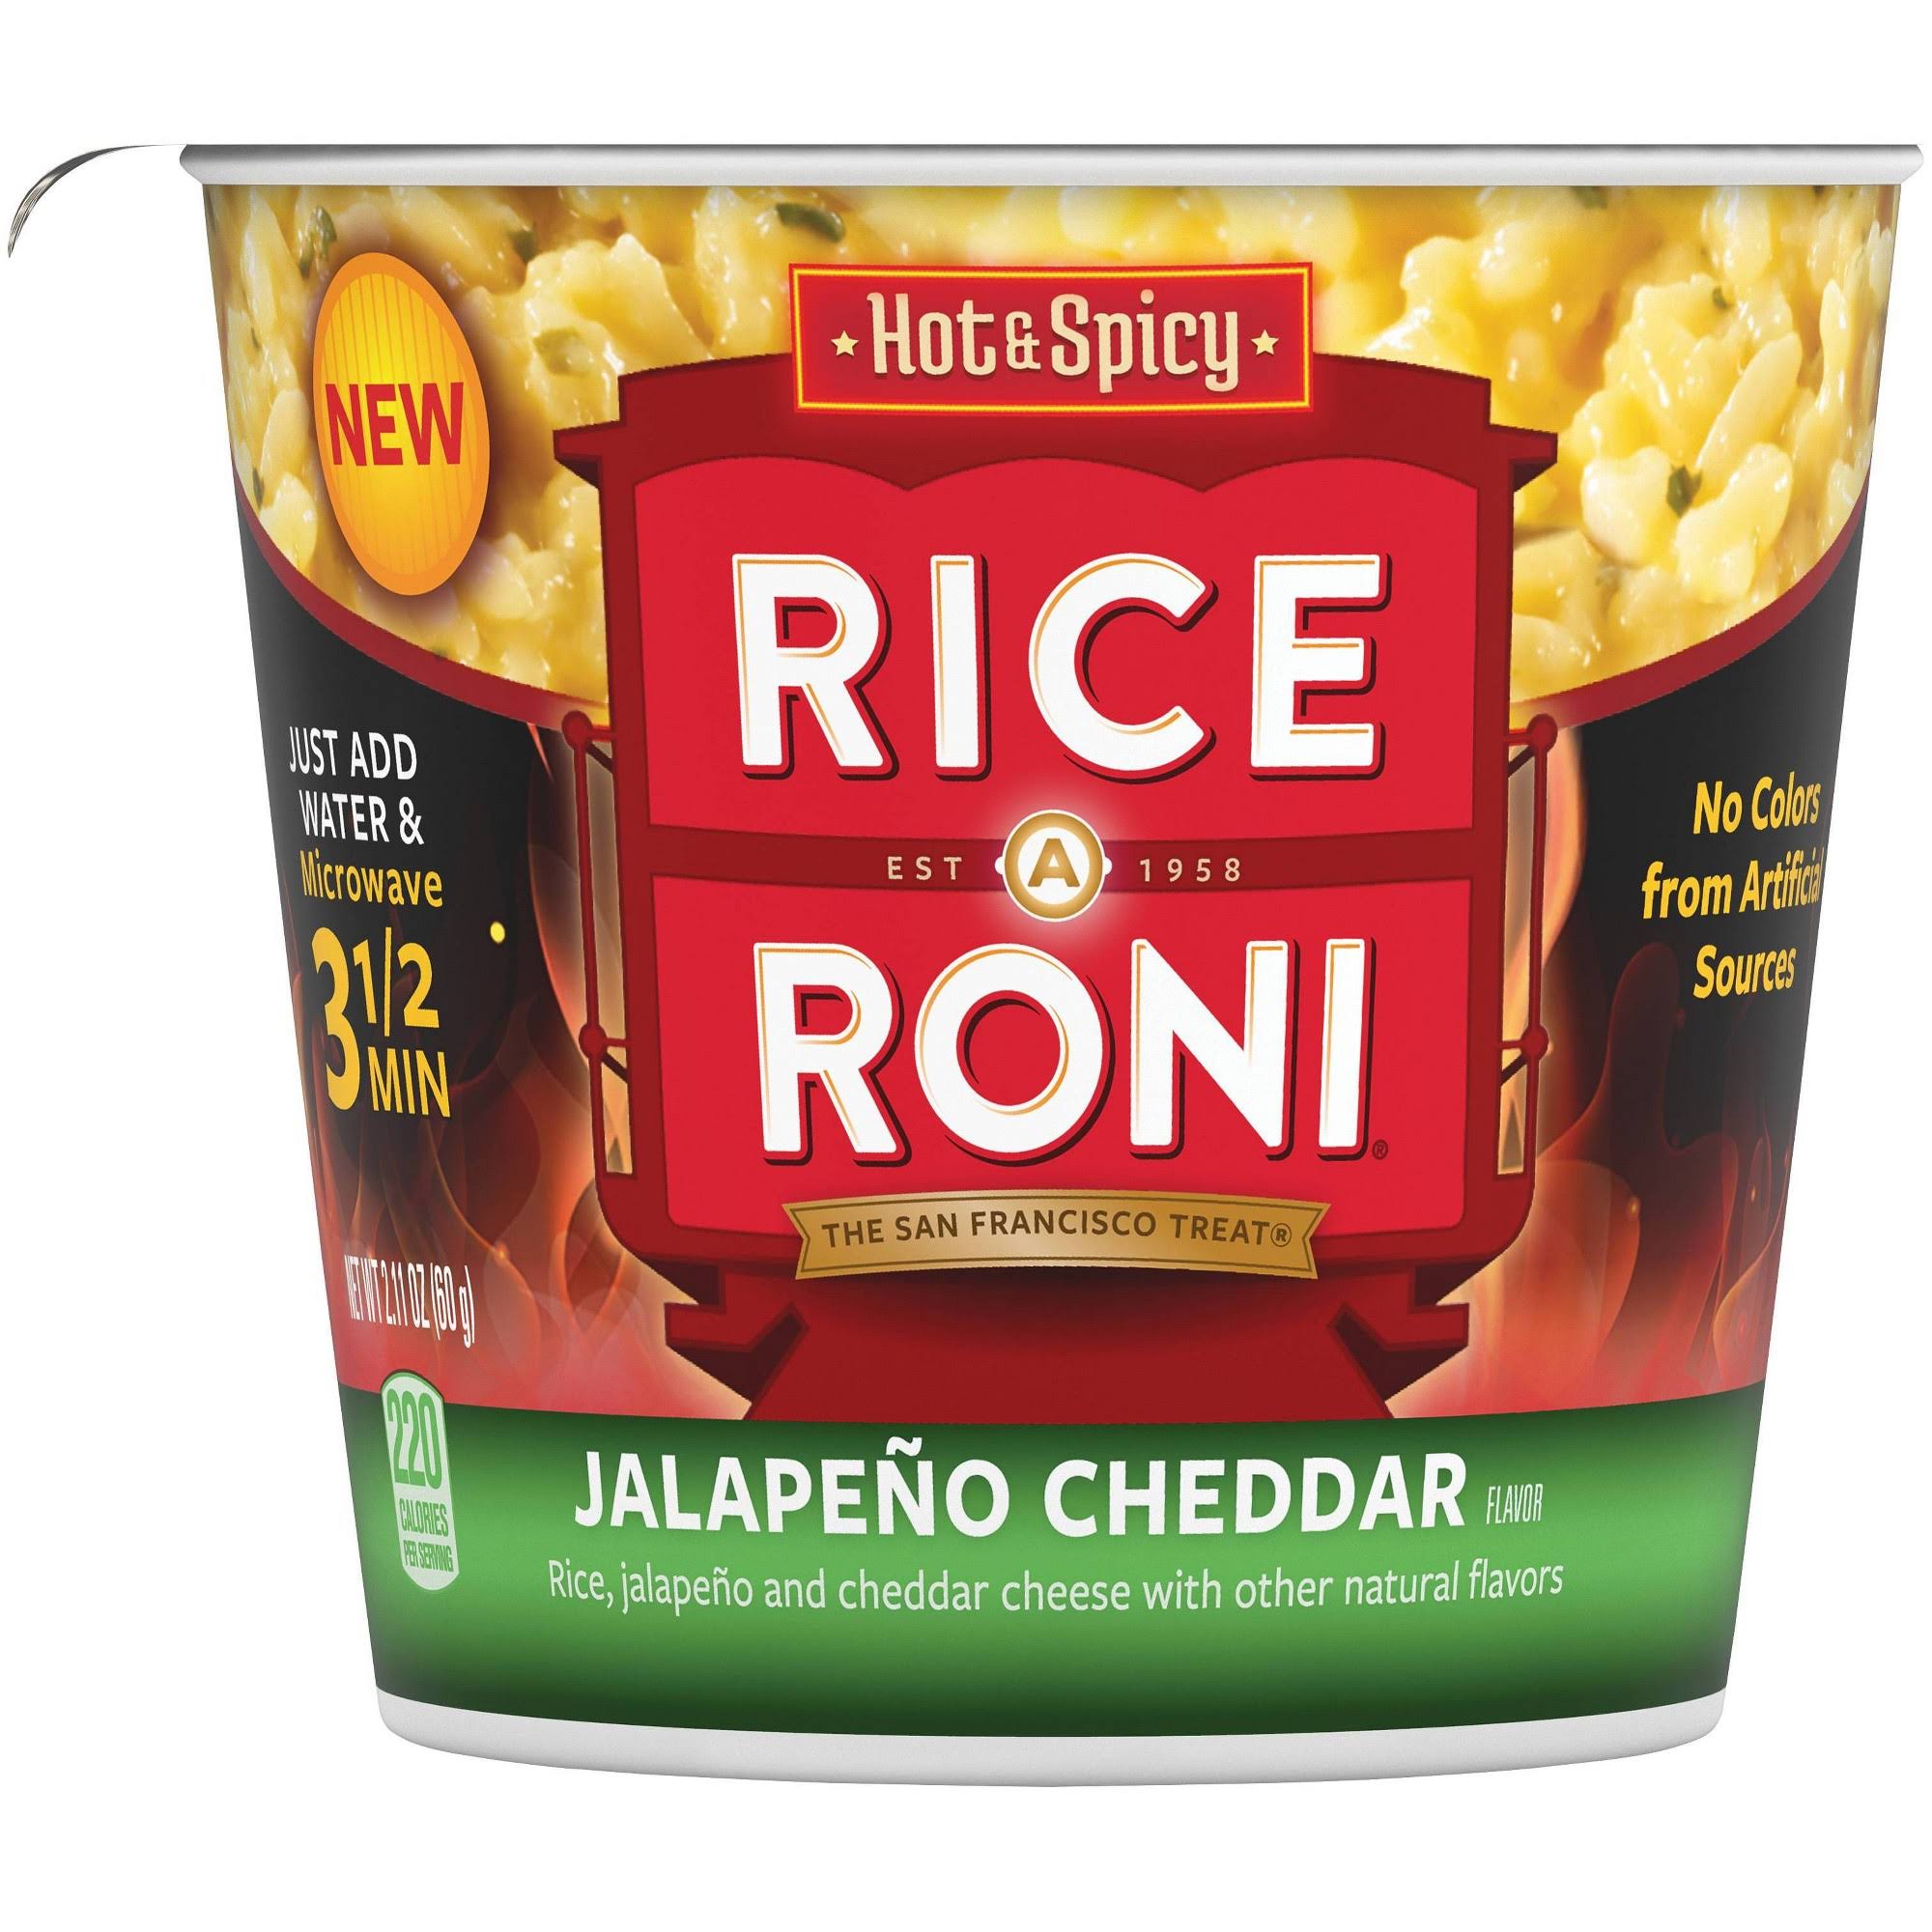 Rice A Roni Rice, Jalapeno Cheddar, Hot & Spicy - 2.11 oz